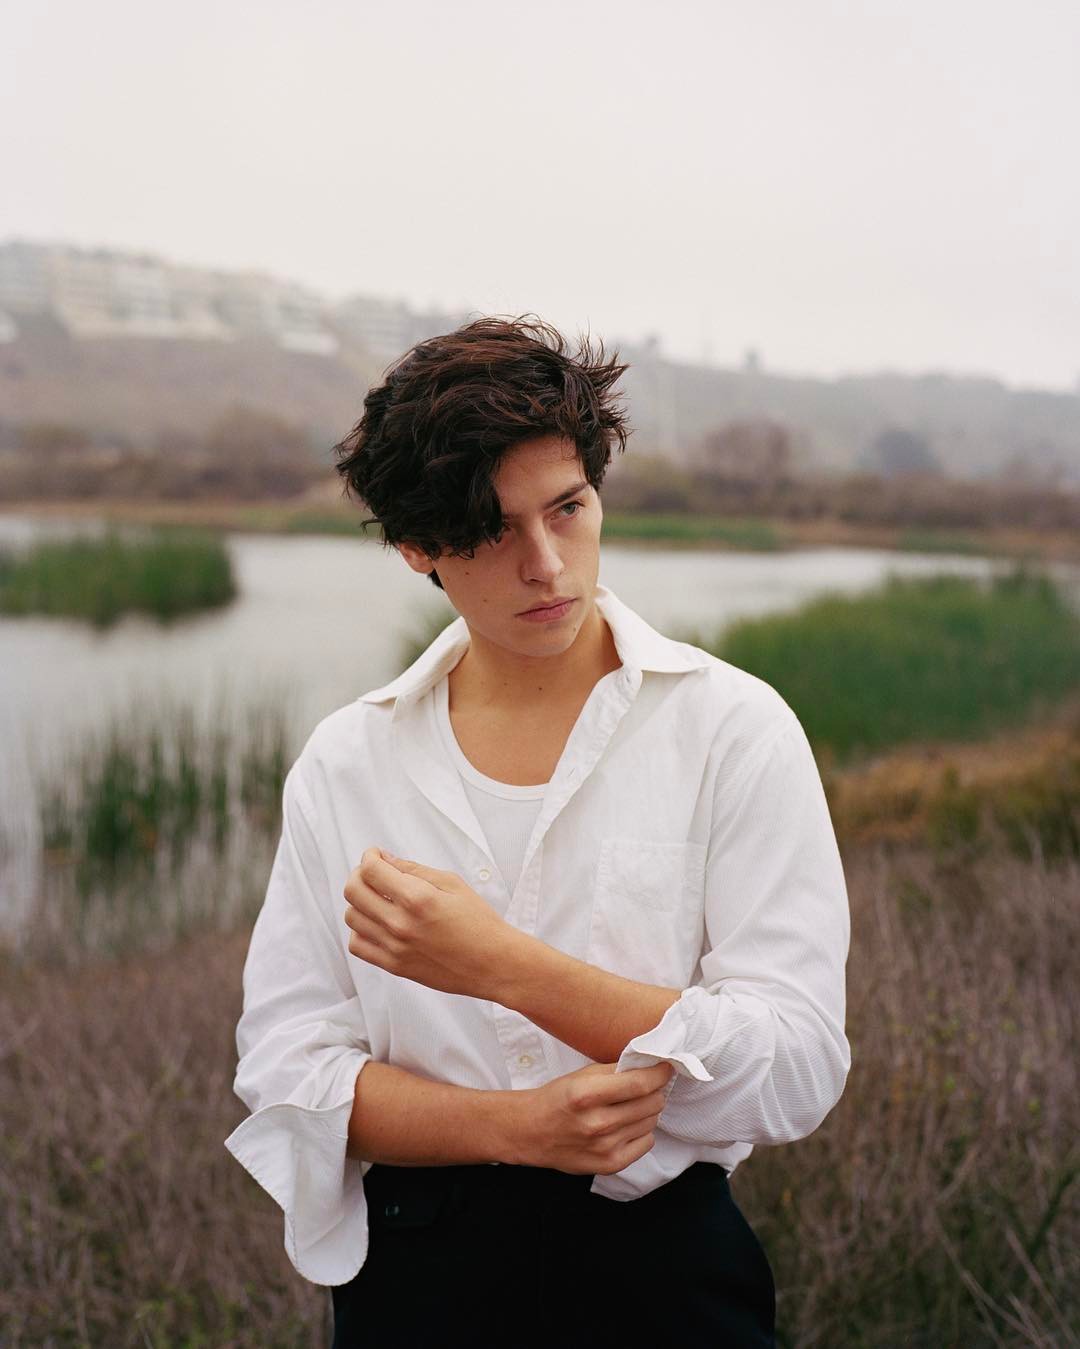 Cole Sprouse looking dazzling in a beautiful white shirt and black pants, near a shrub-filled place.